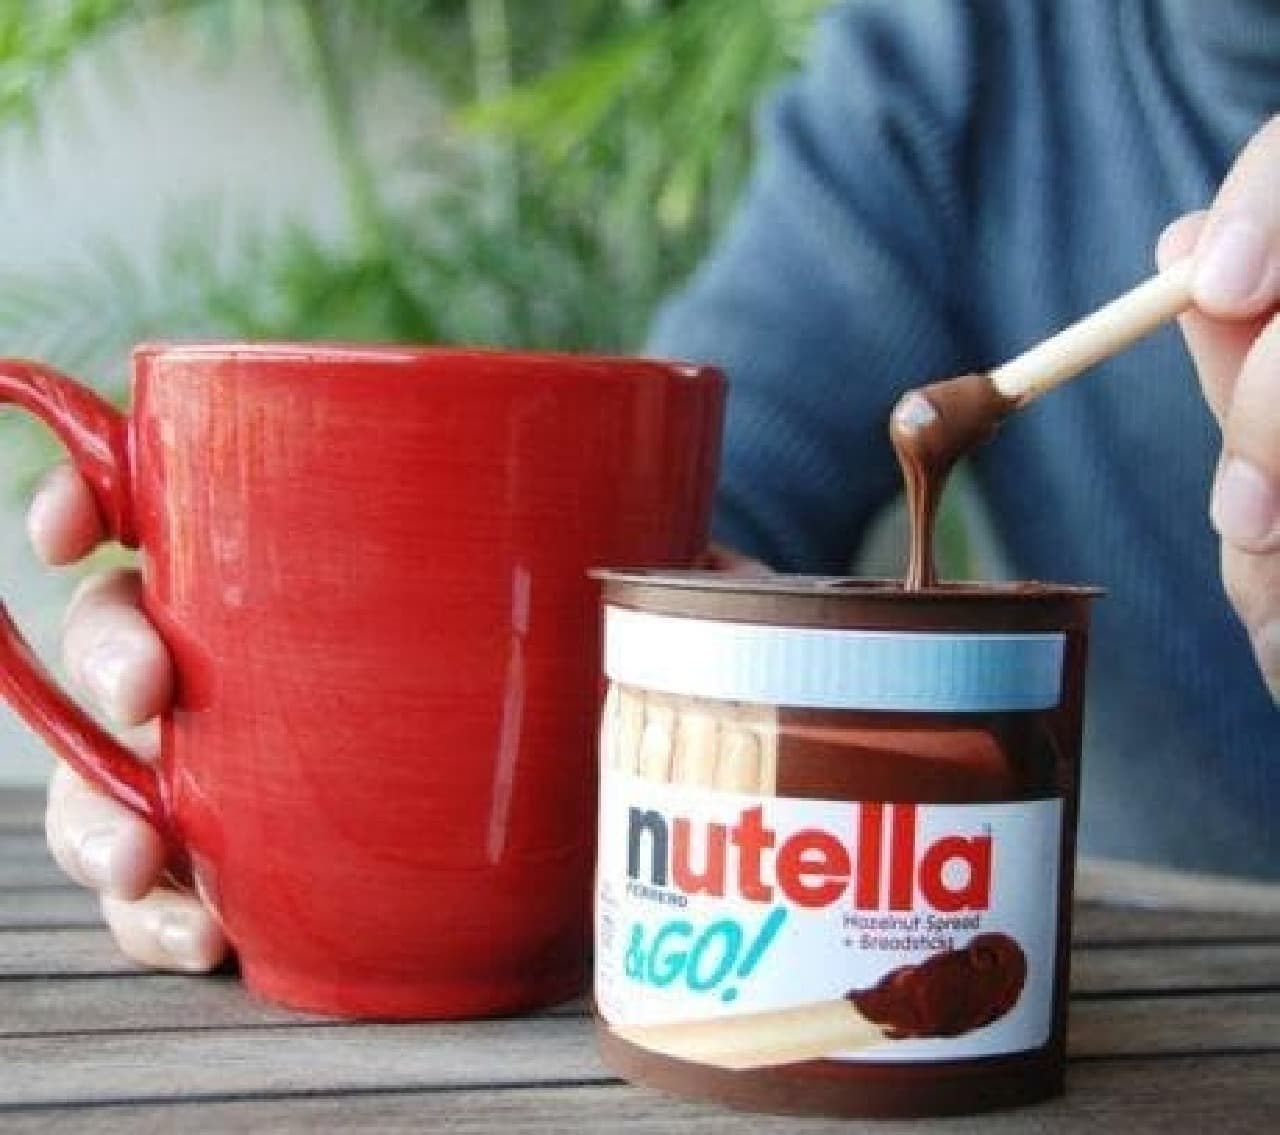 Nutella and Go!